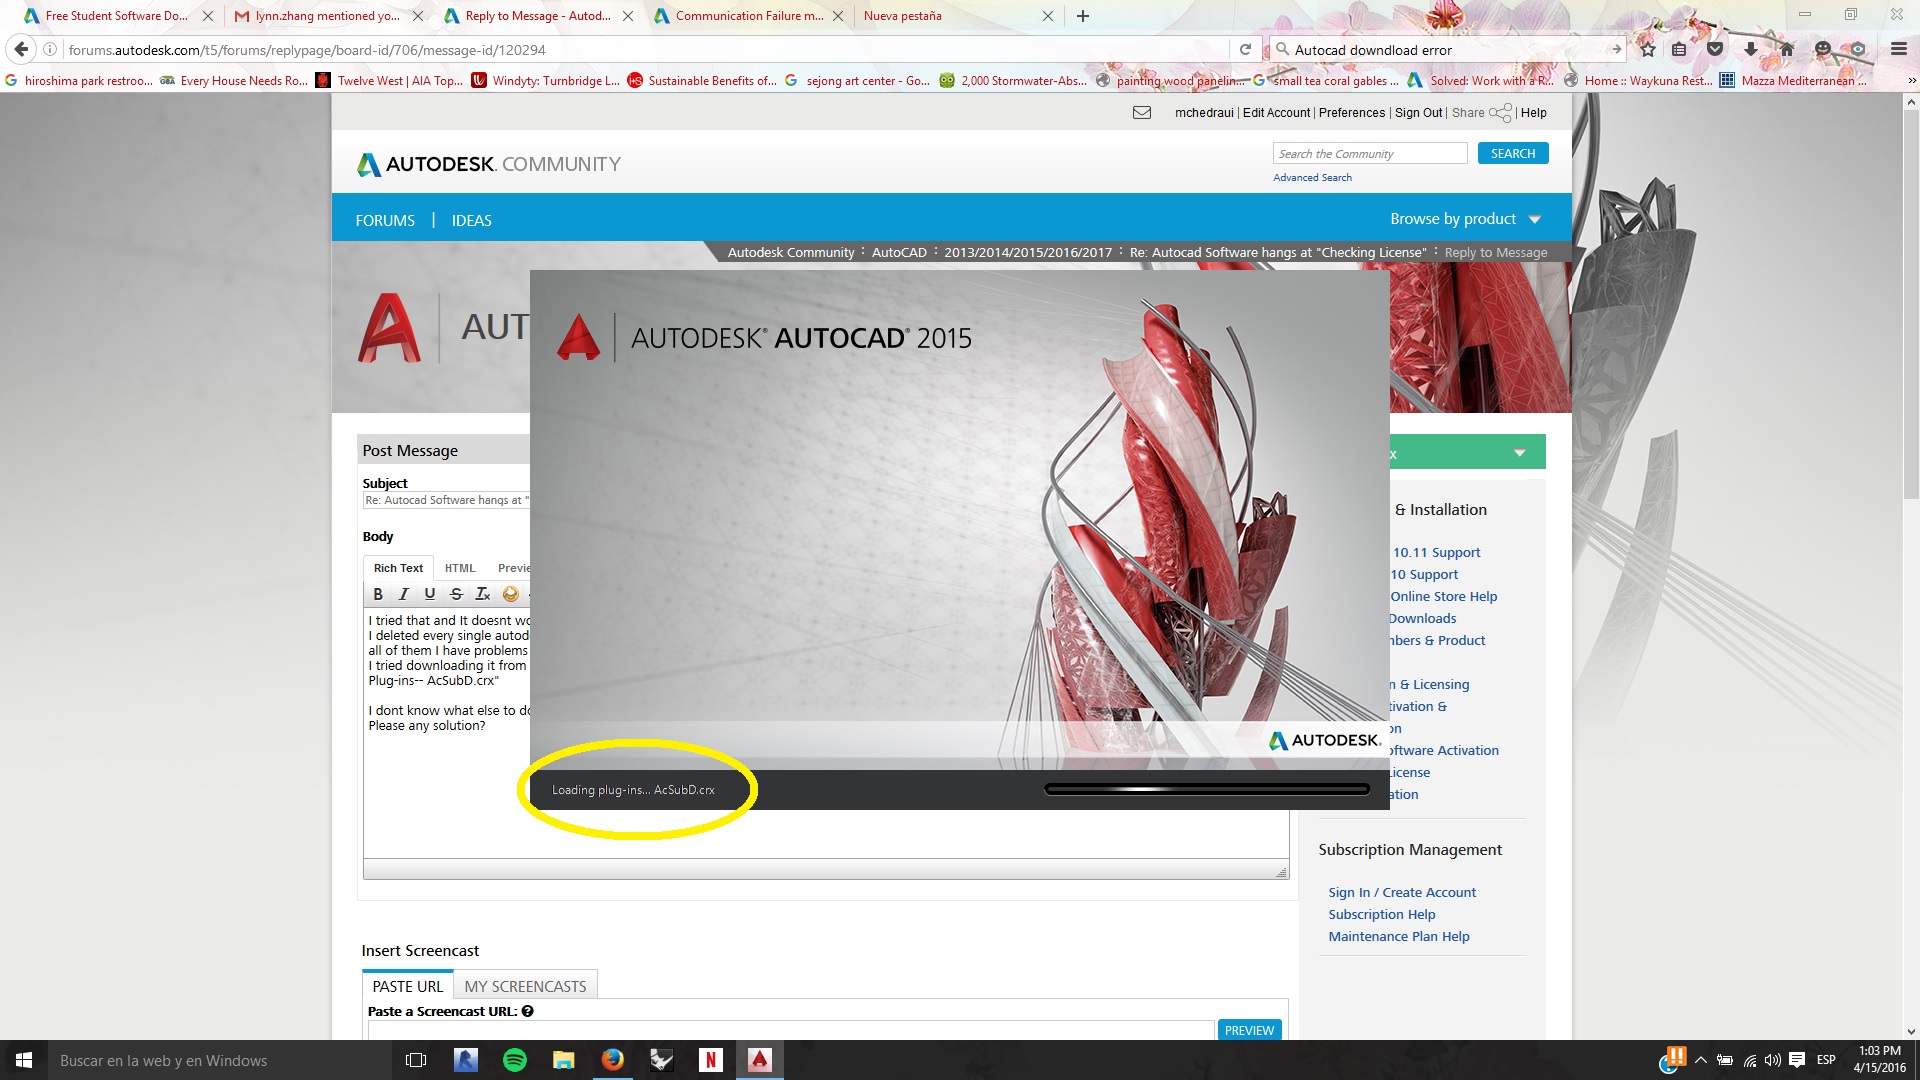 Autocad Software Hangs At Checking License Autodesk Community